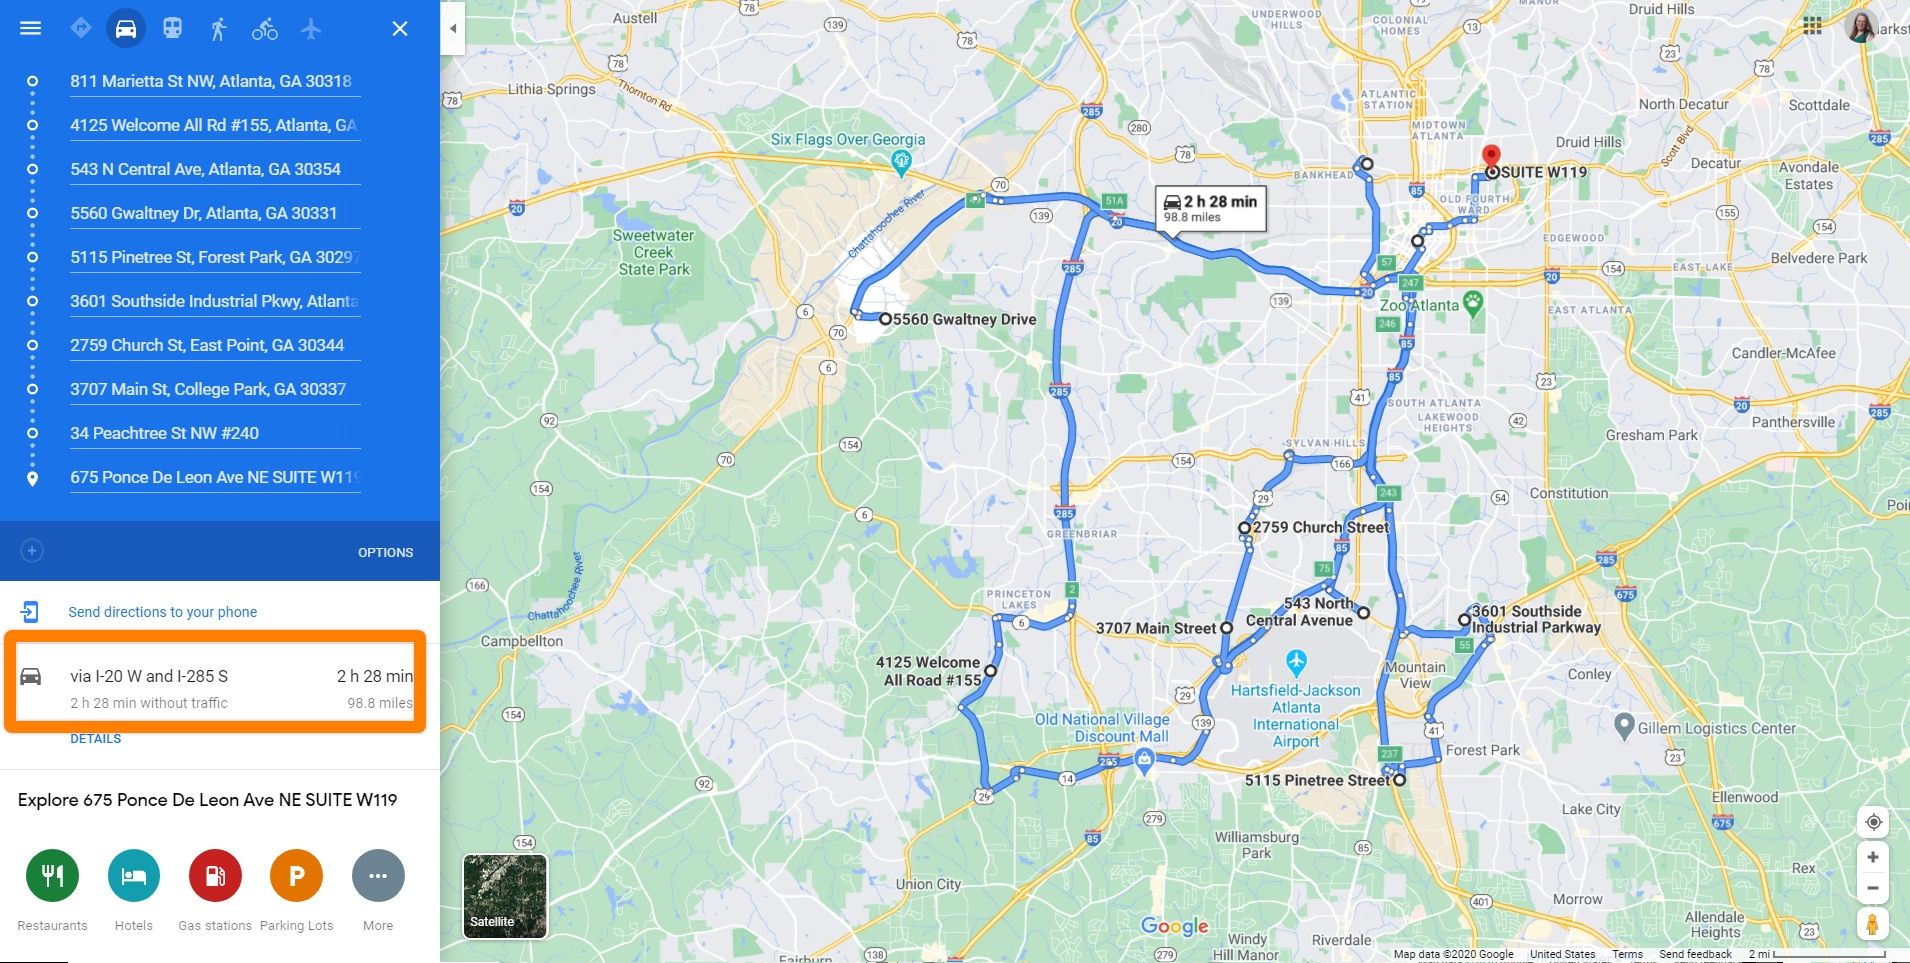 An image of map showing routes in blue on roadways that connect the addresses entered into the Google Maps directions panel